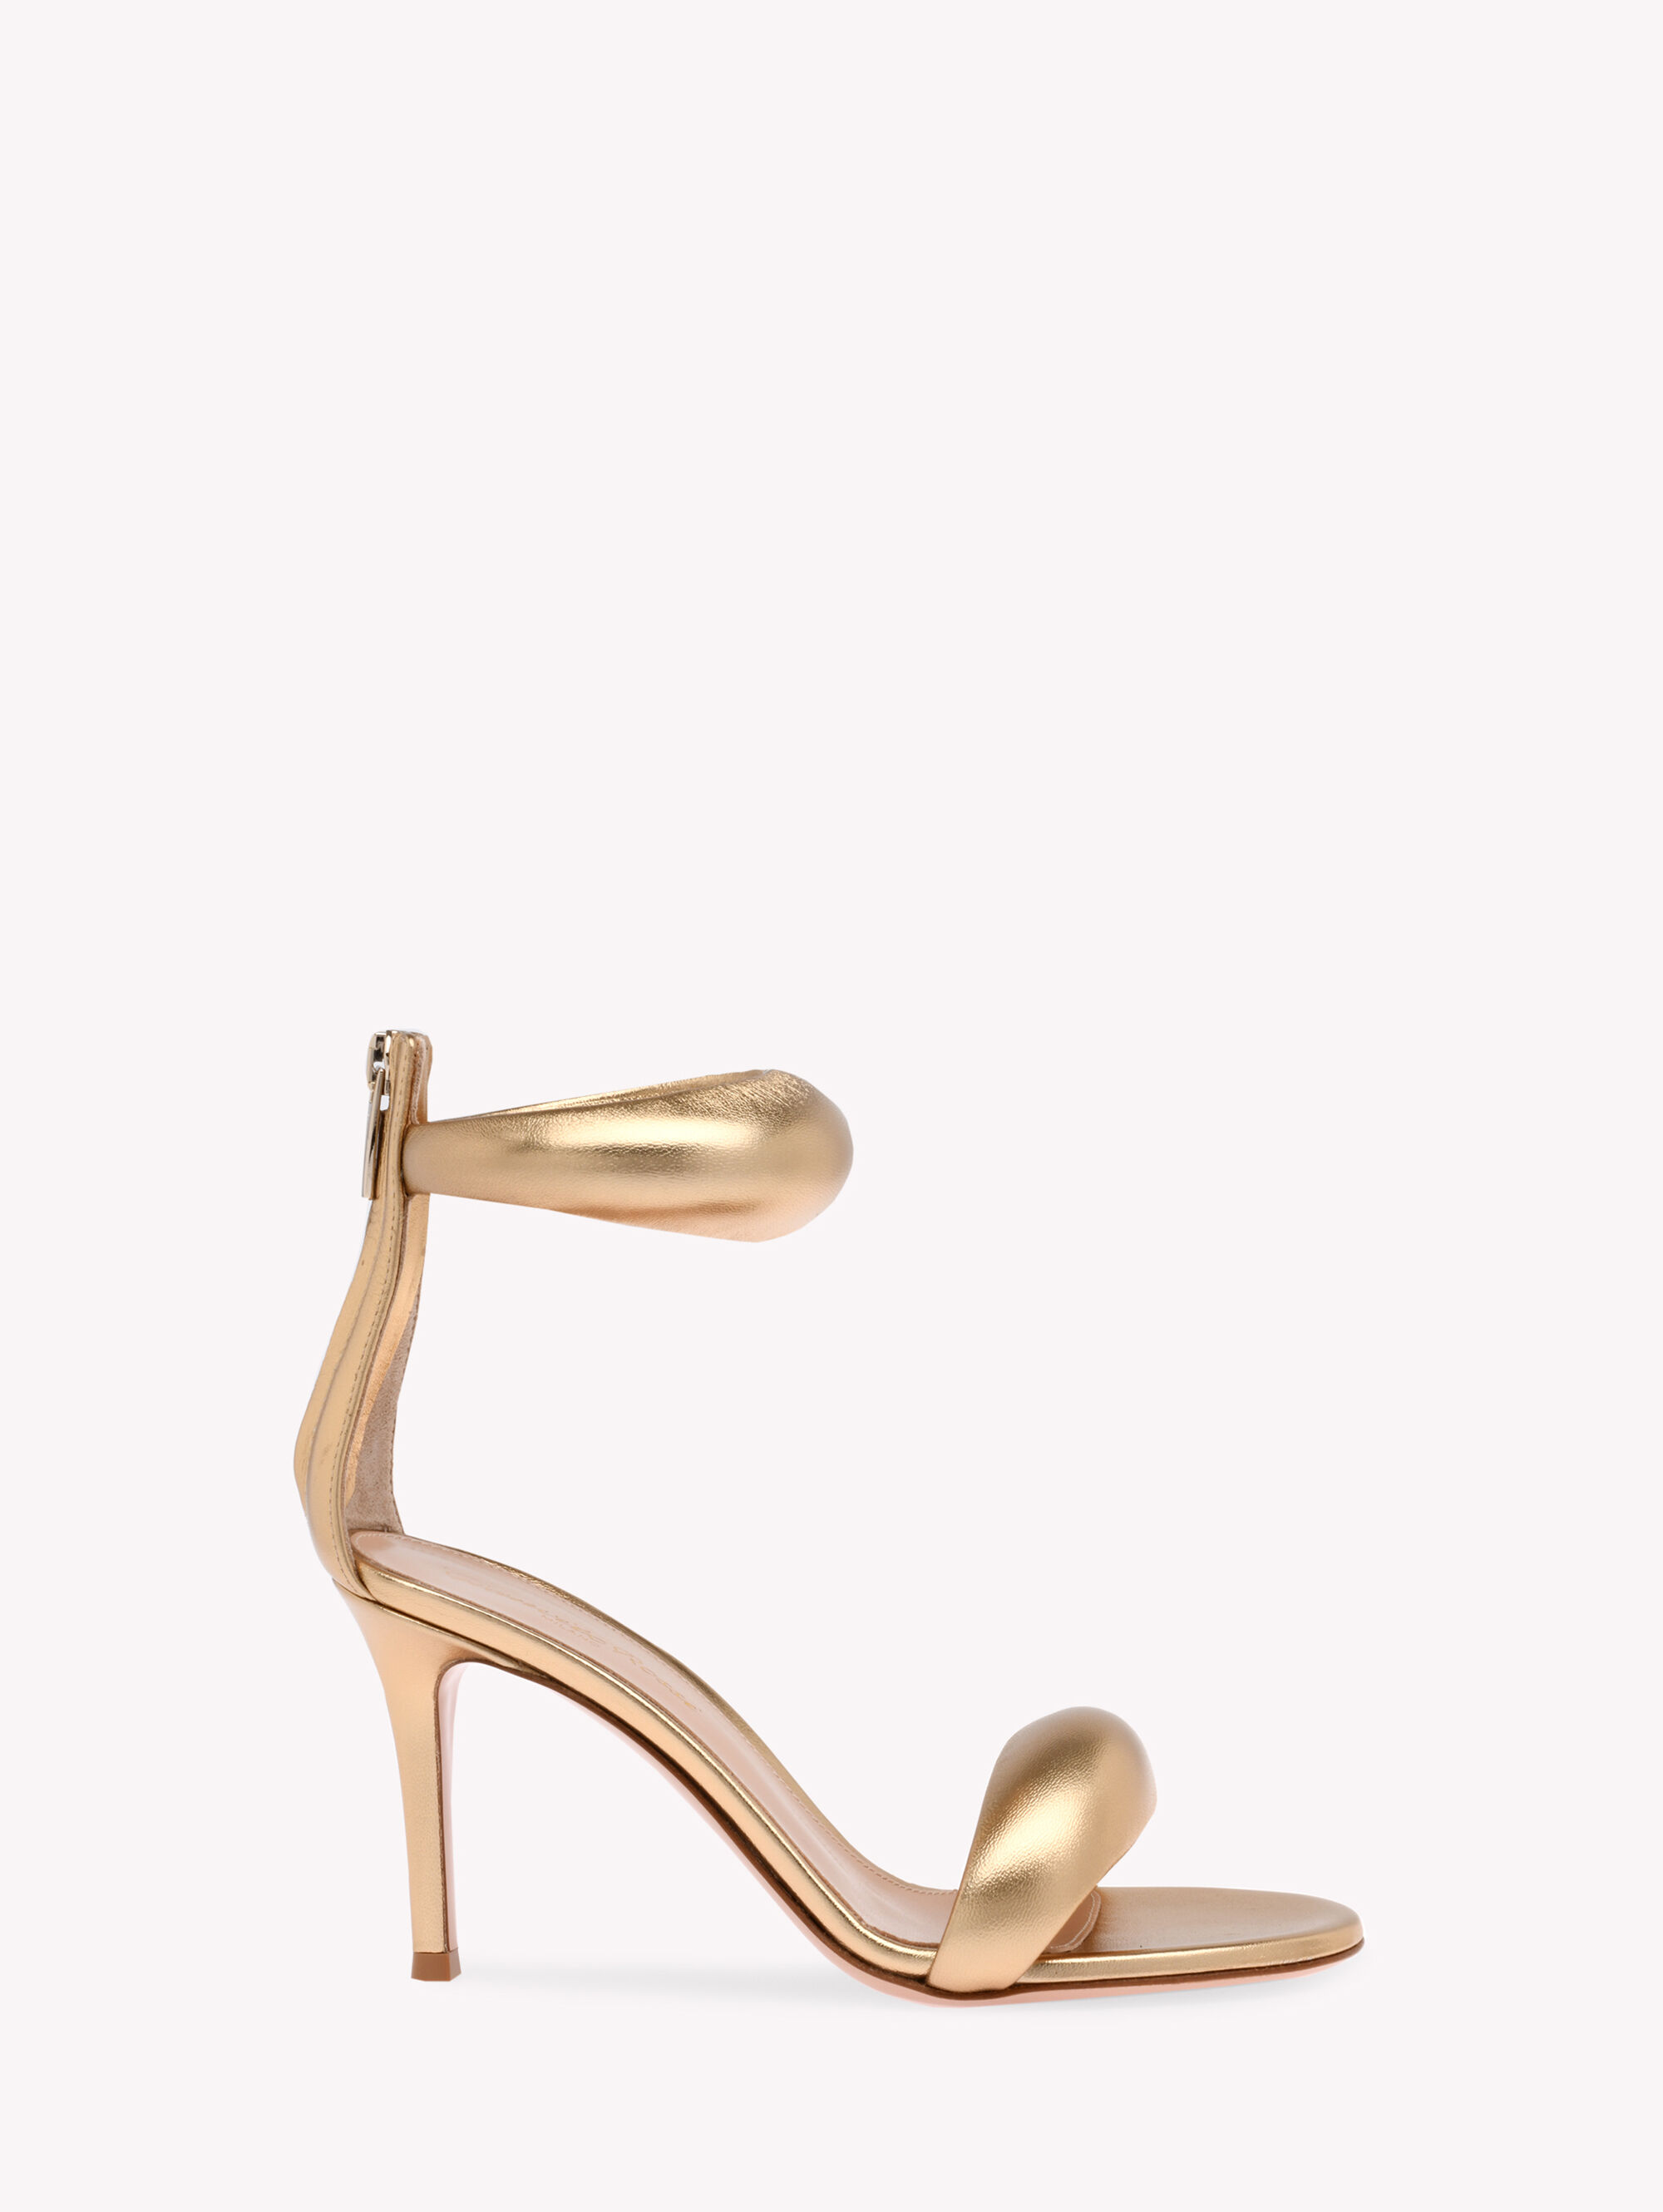 Find amazing products in シューズ today | Gianvito Rossi Japan